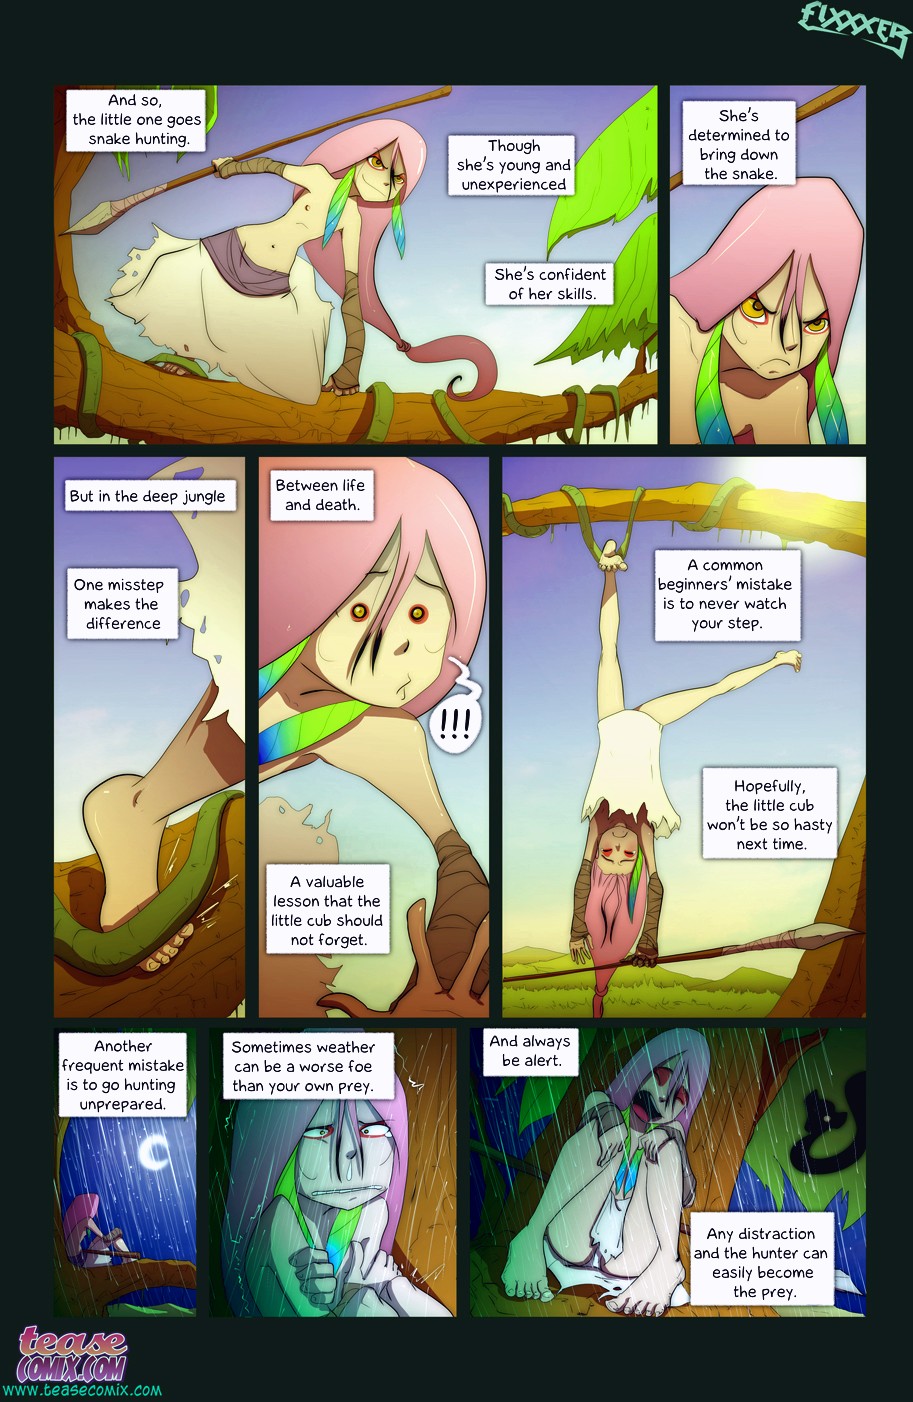 The Snake and The Girl 2 page 04